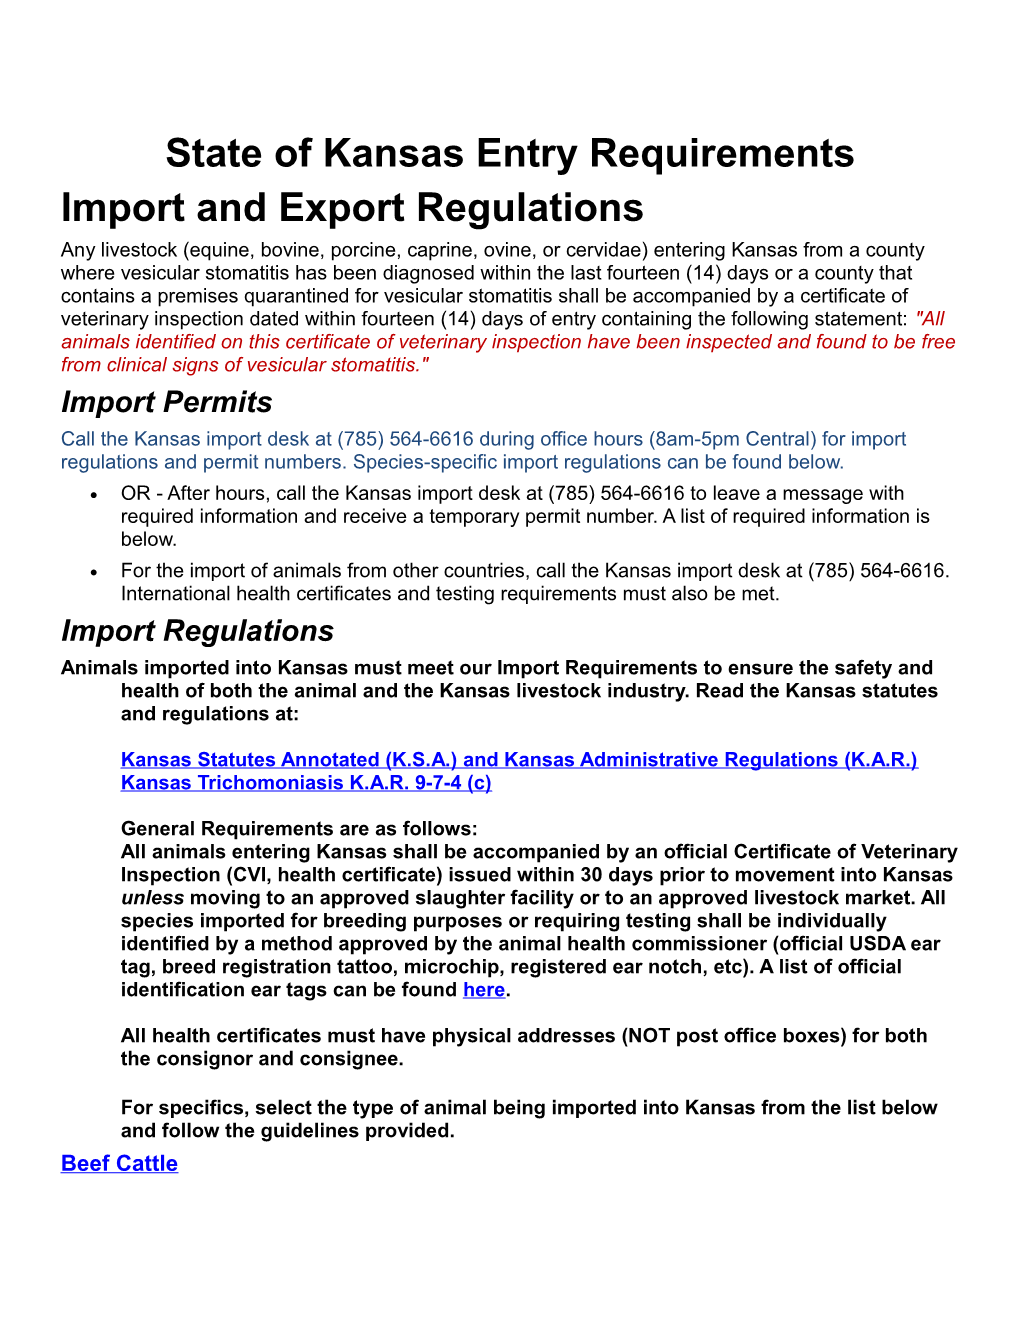 Import and Export Regulations